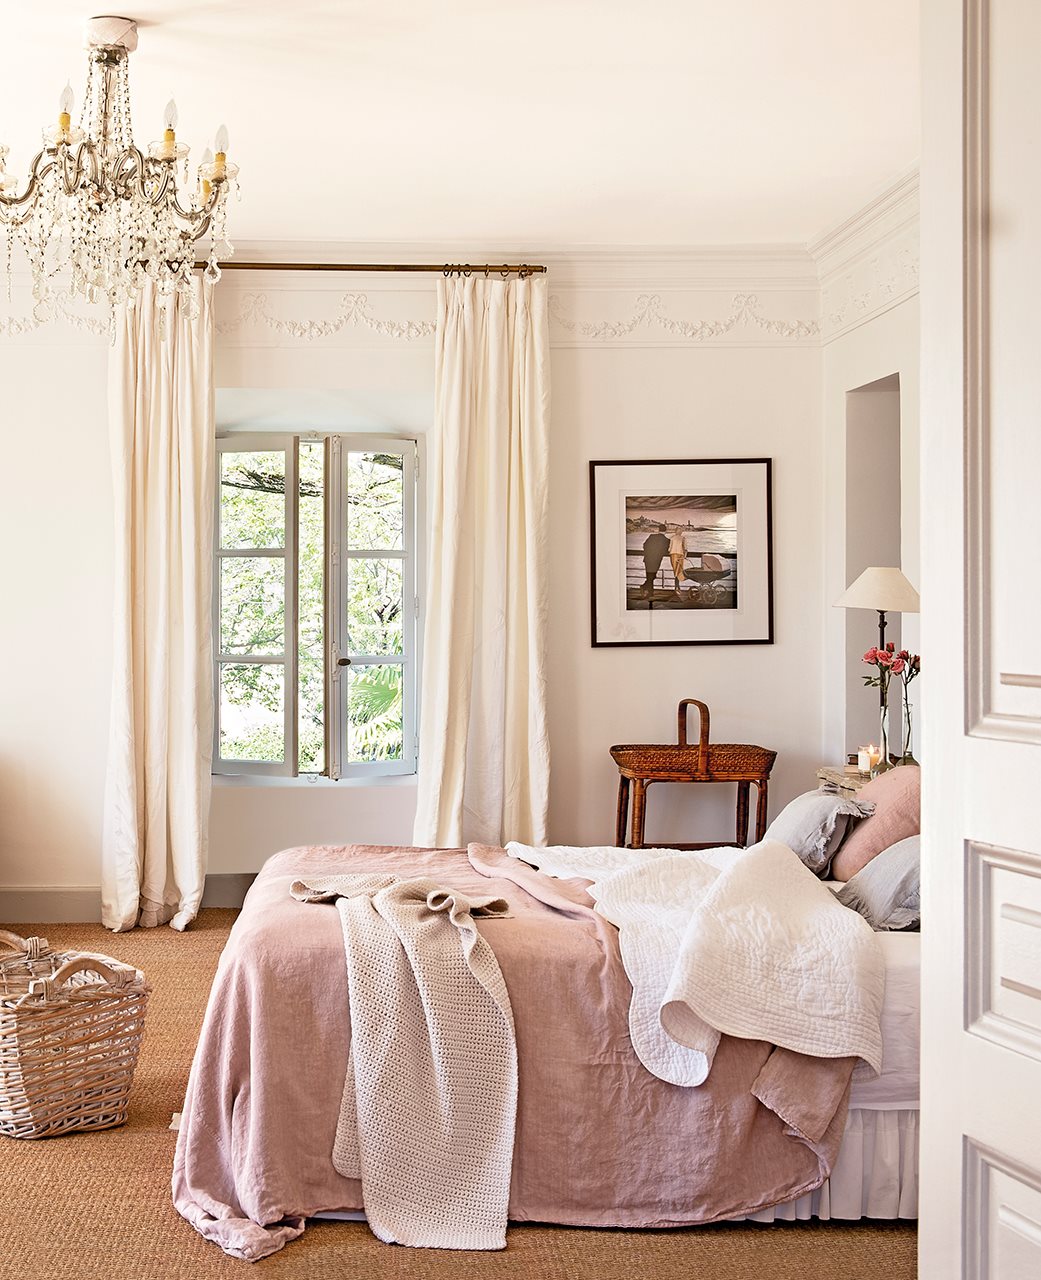 A country house in Provence with an exquisite decoration